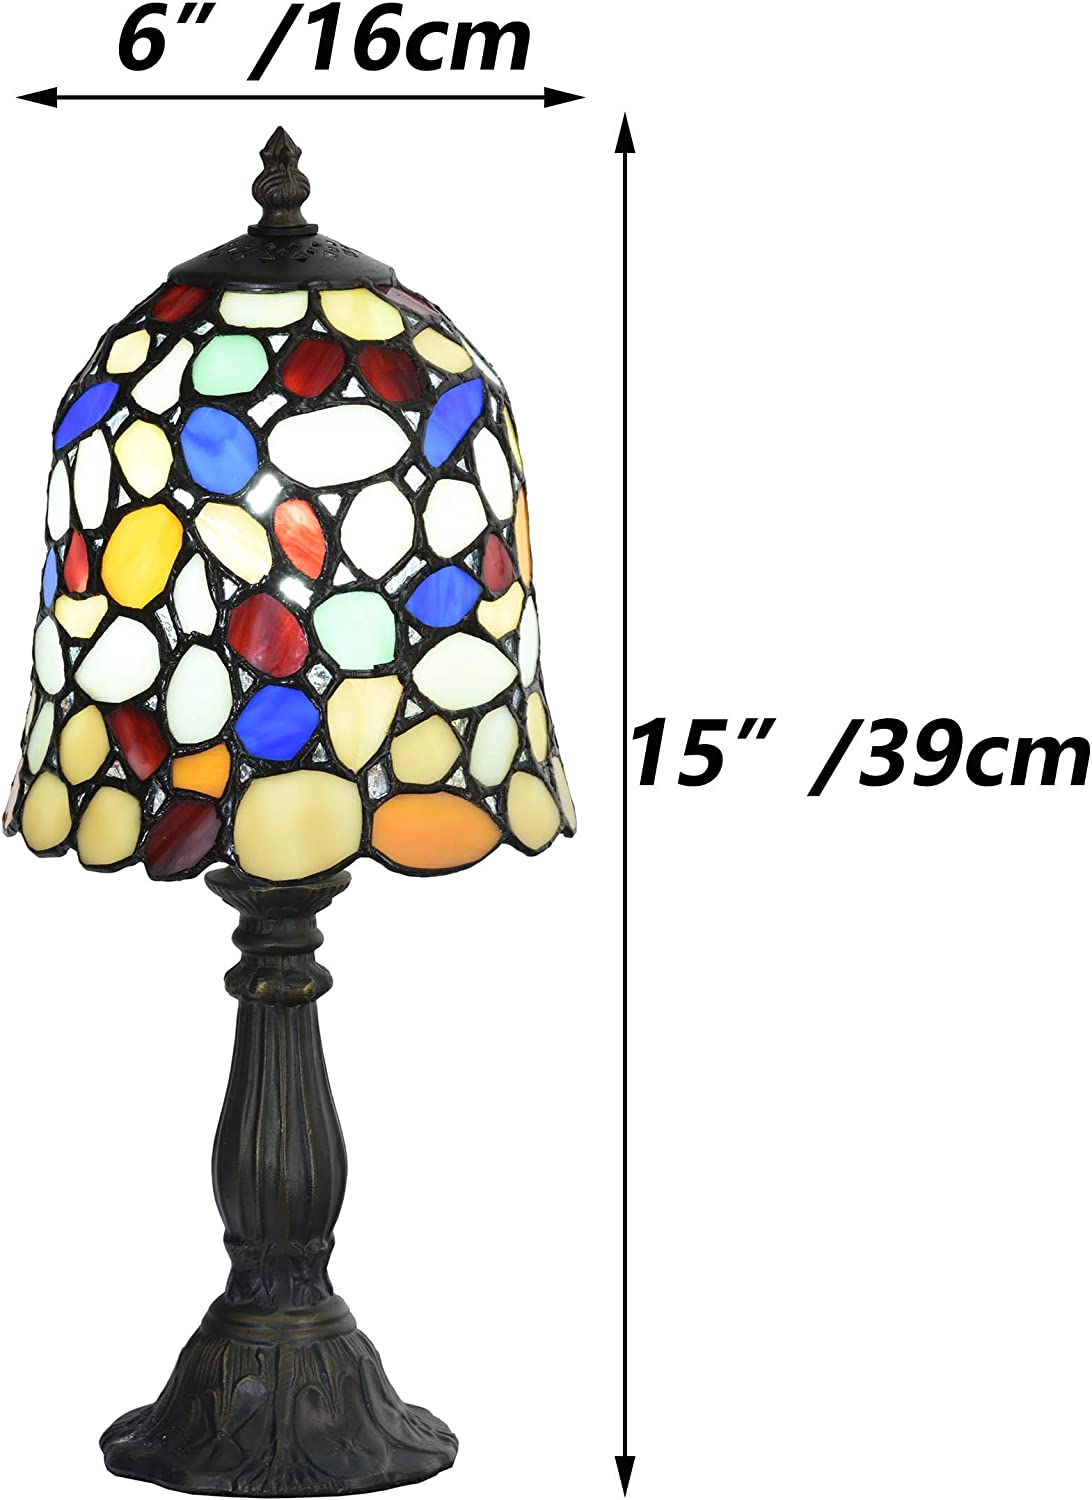 SHADY L10729 Colored Cobblestone  Style Stained Glass Table Lamp with 6-inch Wide Lampshade  Multi-Colored  15 inch Tall